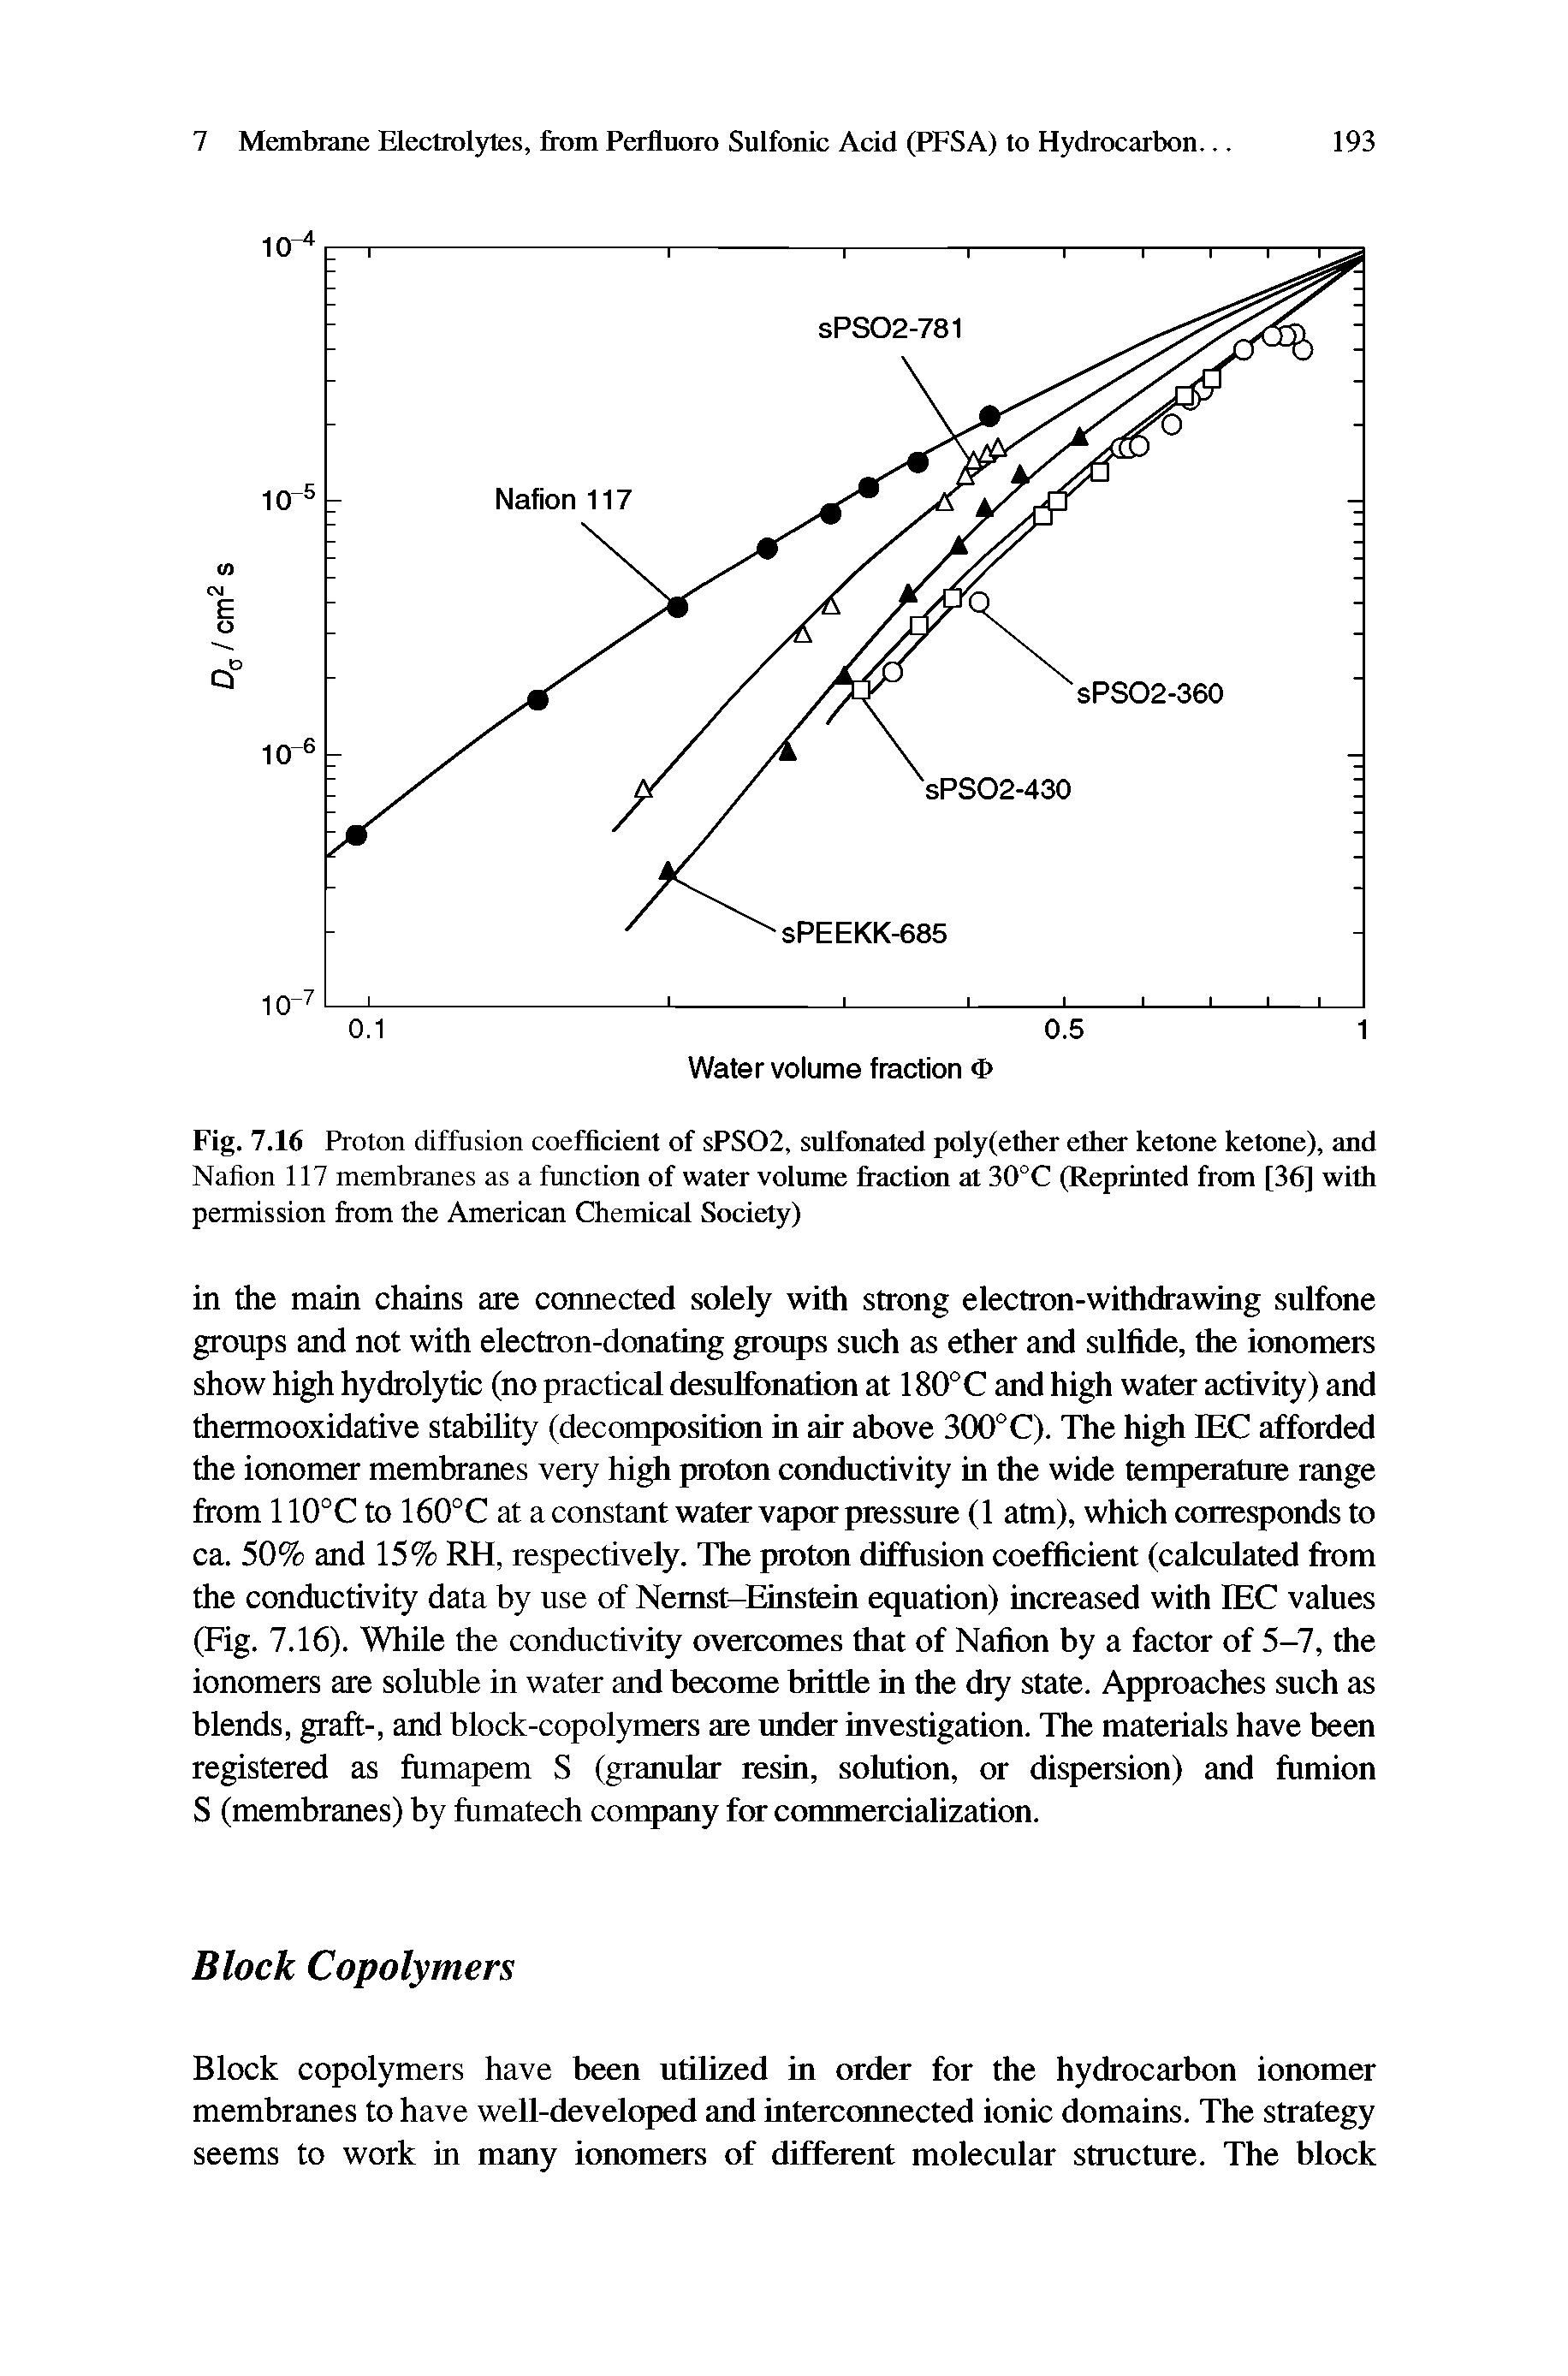 Fig. 7.16 Proton diffusion coefficient of sPS02, sulfonated polyfether etha- ketone ketone), and Nafion 117 membranes as a function of water volume fraction at 30°C (Reprinted from [36] with permission from the American Chemical Society)...